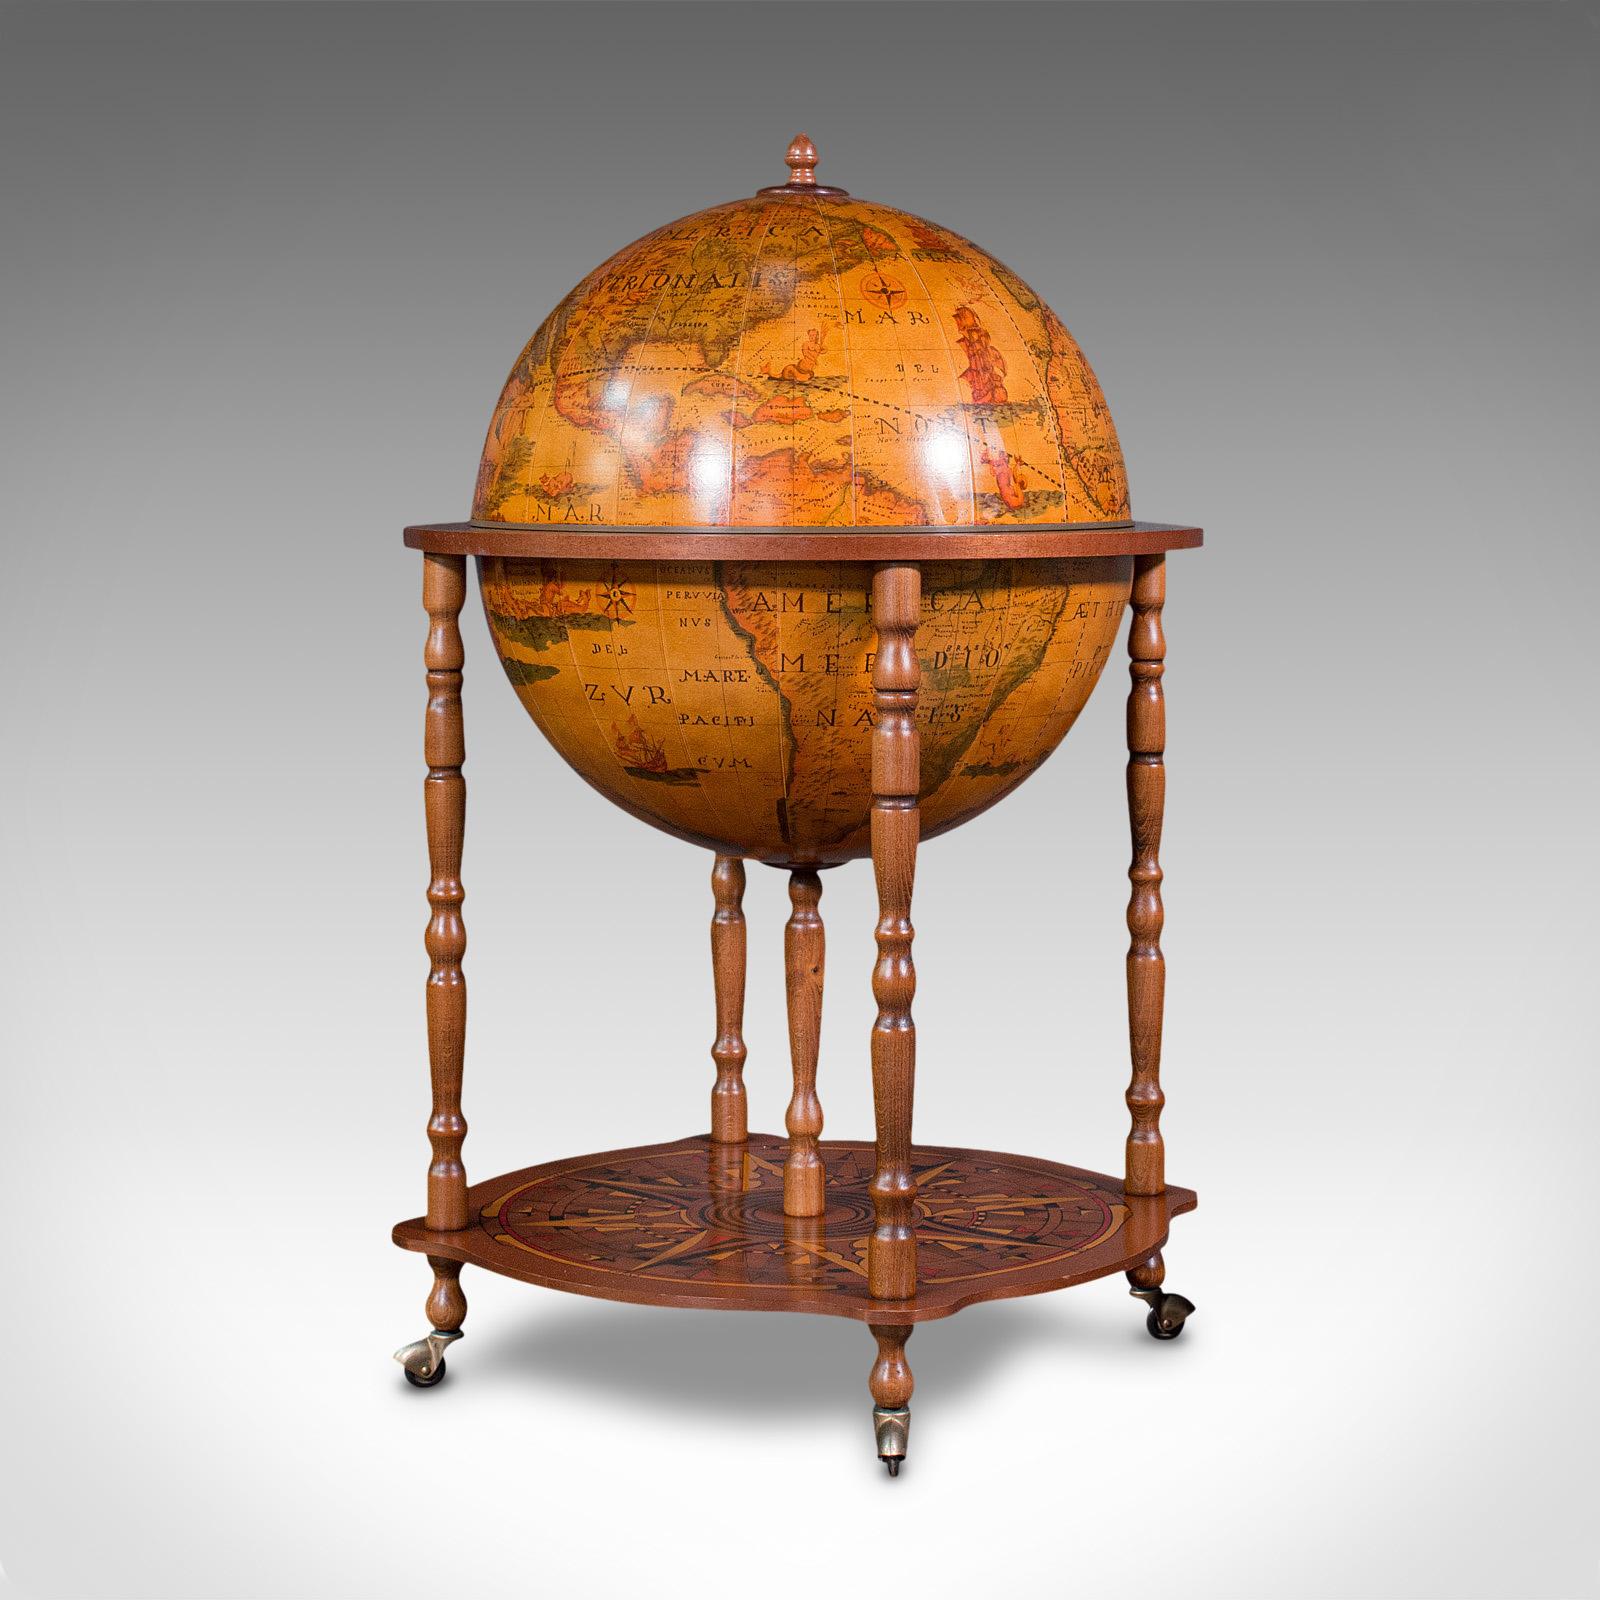 20th Century Vintage Terrestrial Drinks Globe, Continental, Cocktail Trolley, Cabinet, C.1970